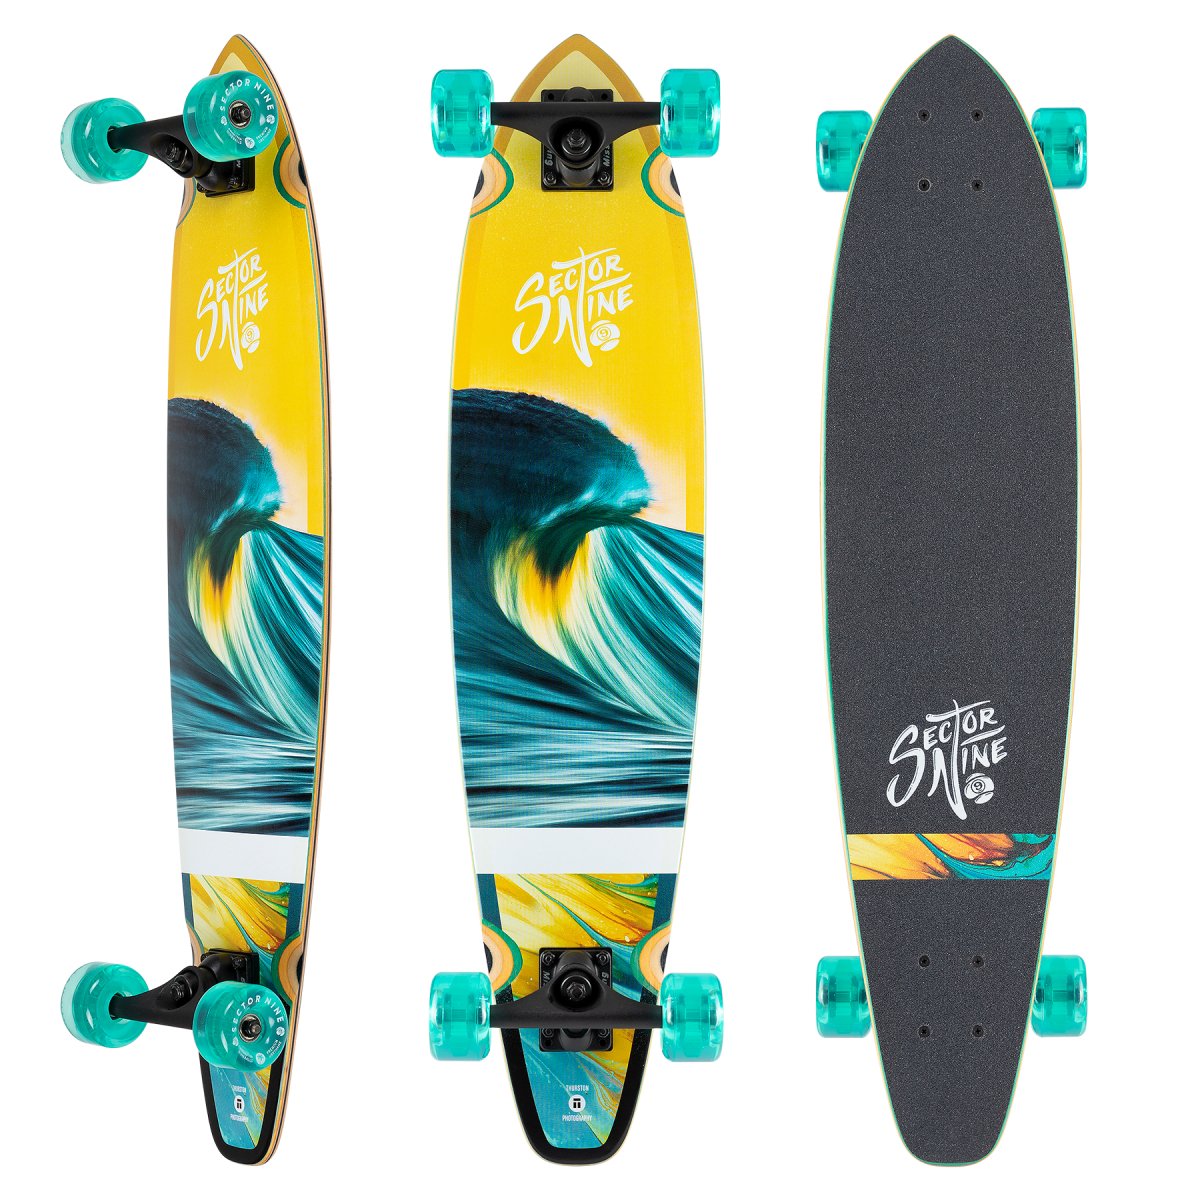 SECTOR 9 Highline Shine Complete 34.5 x 8.0 - Cruiser - Completes